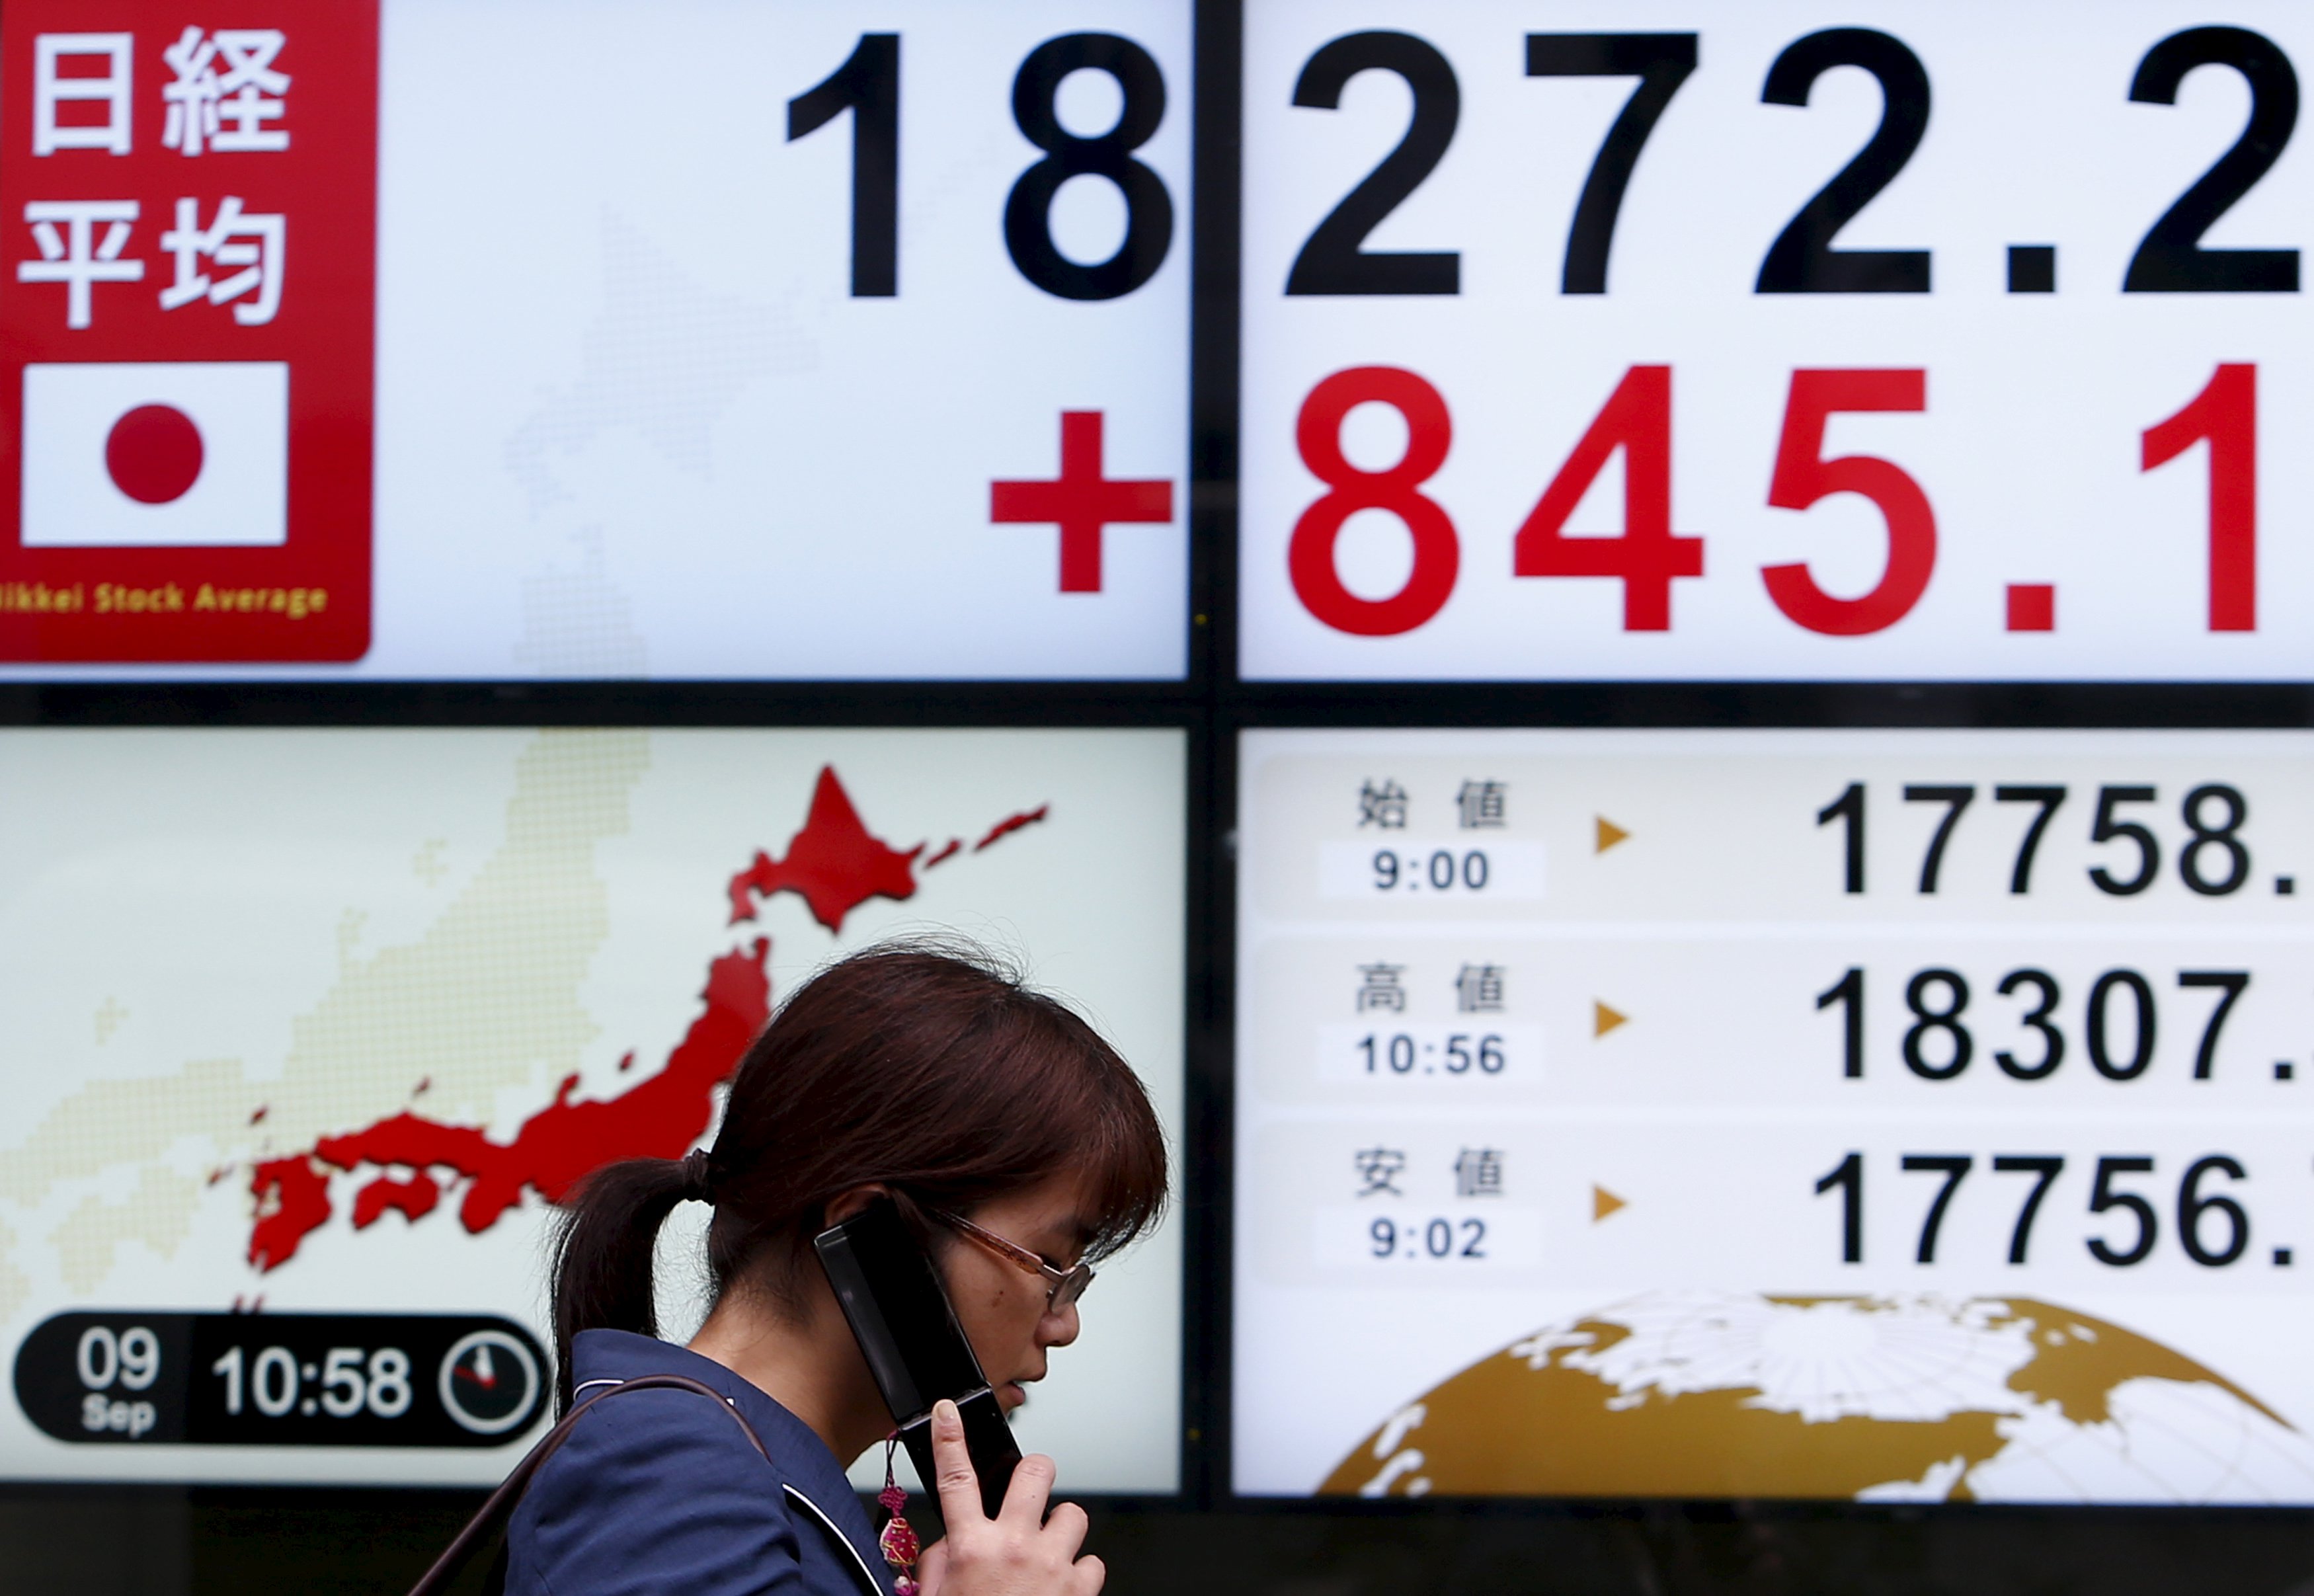 A pedestrian on his cell phone walks past an electronic board showing the Nikkei Index in Japan as it posted its strongest single-day rally in 7 years. Photo: Reuters